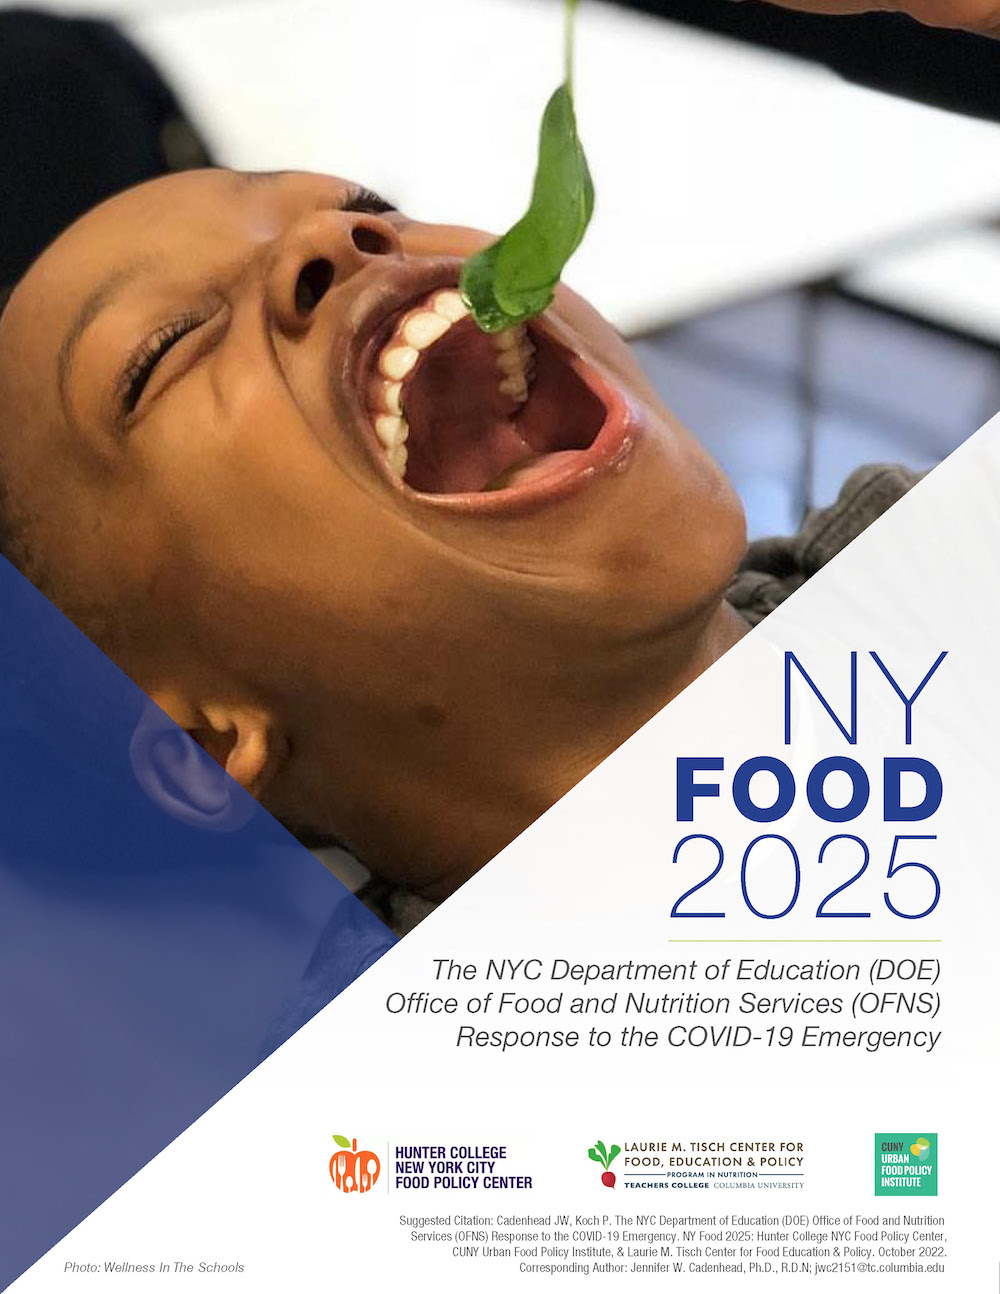 New York Food 2025: Examining the NYC Department of Education (DOE) Office of Food and Nutrition Services (OFNS) Response to the COVID-19 Emergency